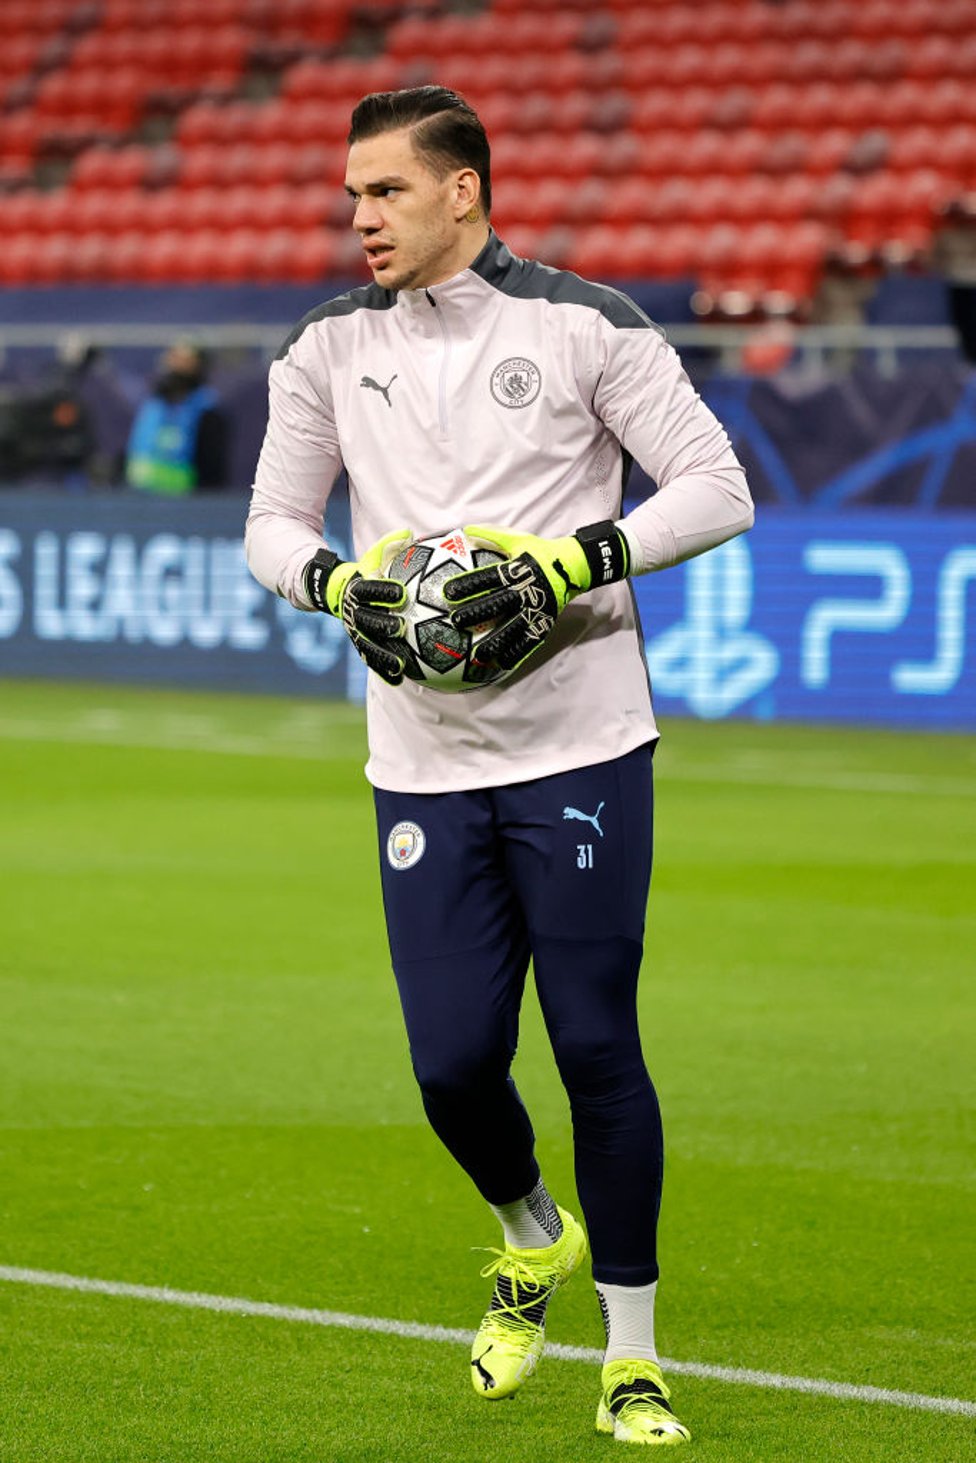 STEADY EDDIE : Our Brazilian shot-stopper gets a feel of the ball during the warm up.